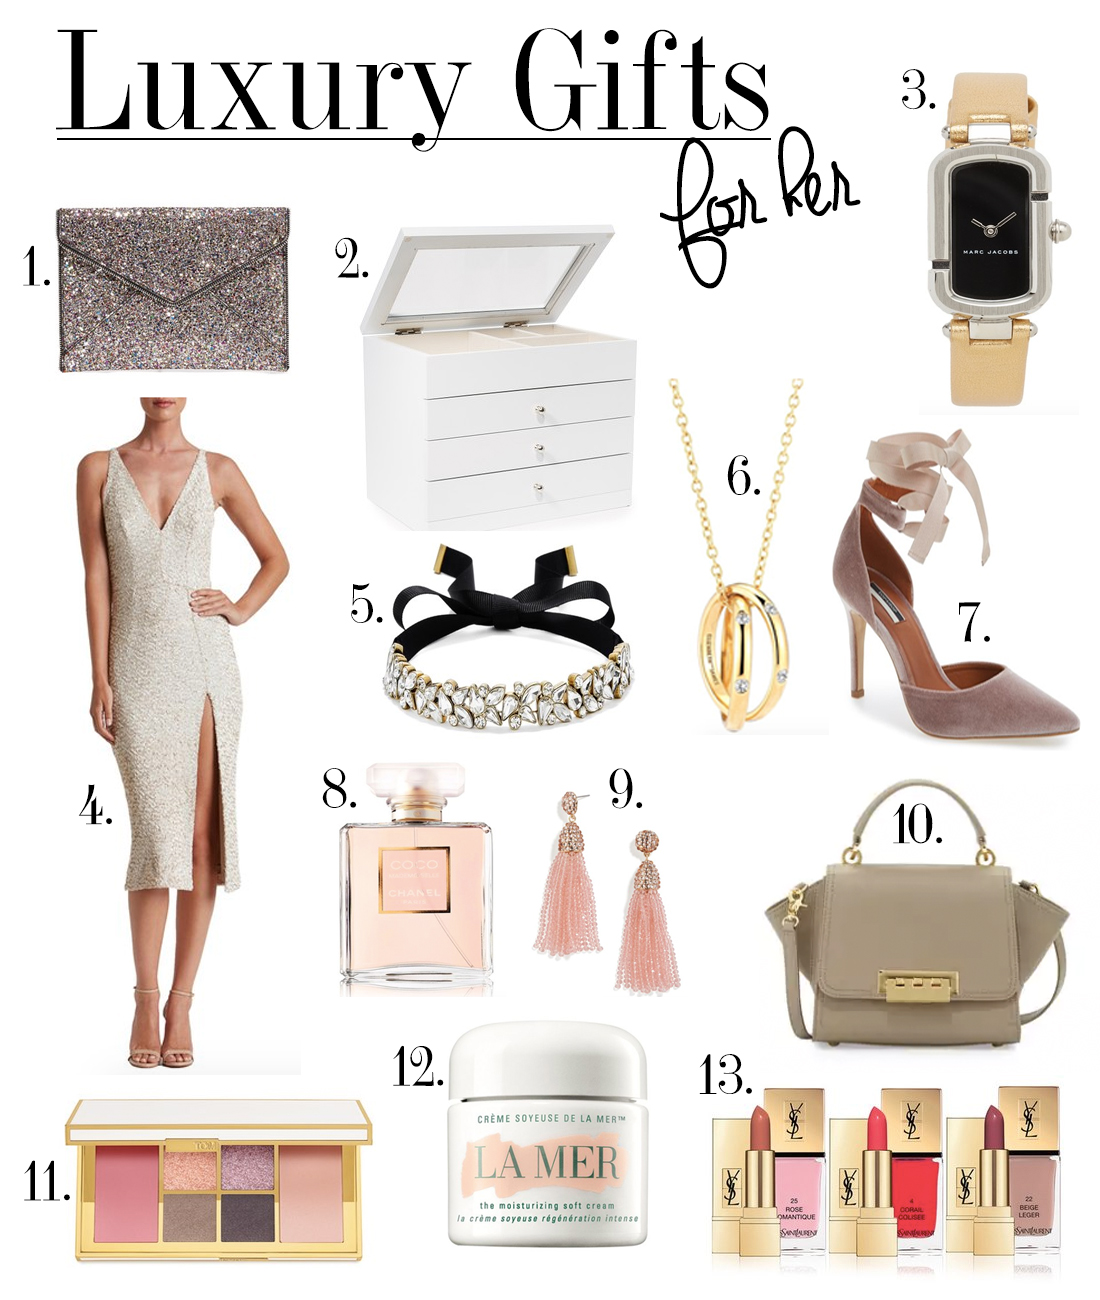 Luxury gift guide for her